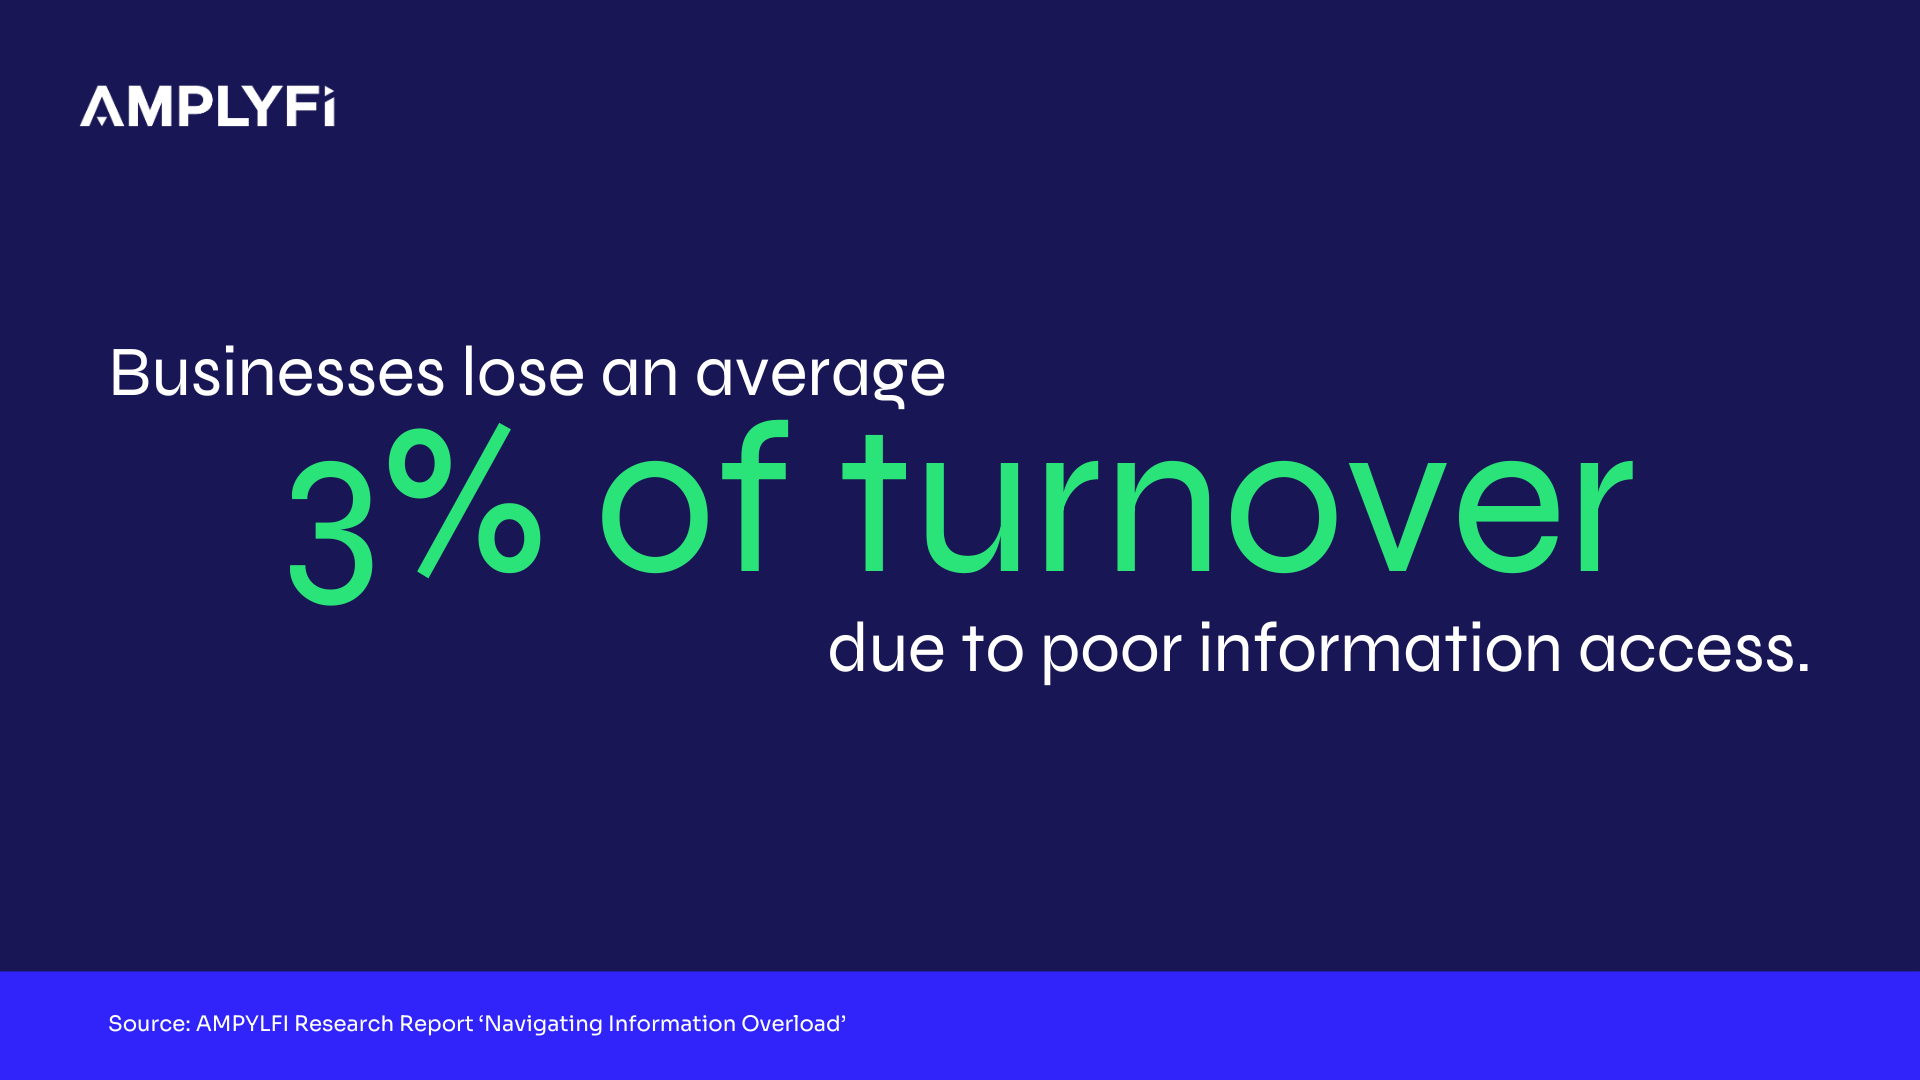 businesses lose an average of 3% of turnover due to poor information access